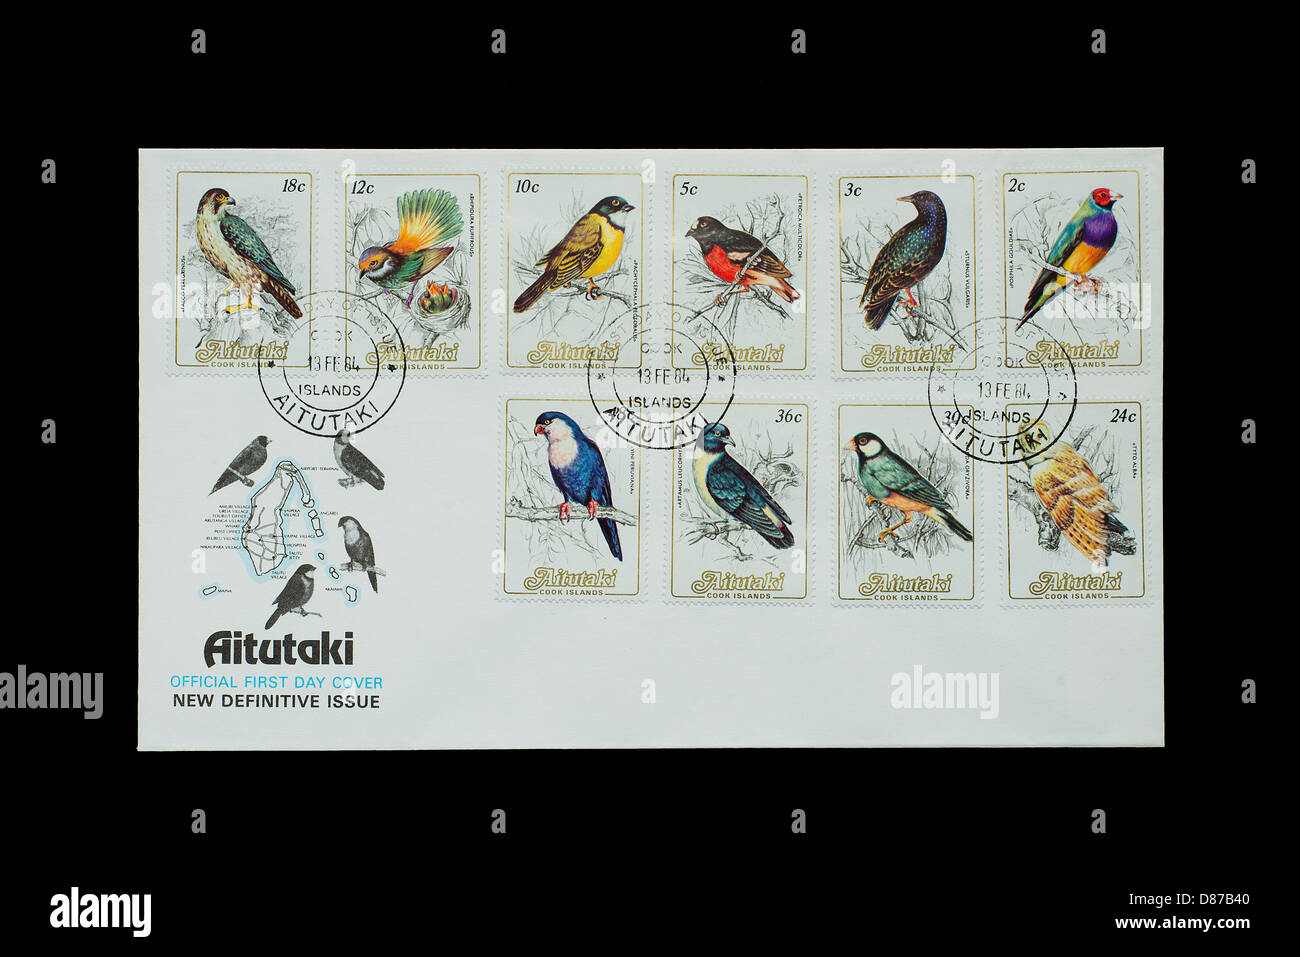 The official first day cover of stamps of Aitutaki Islands Stock Photo